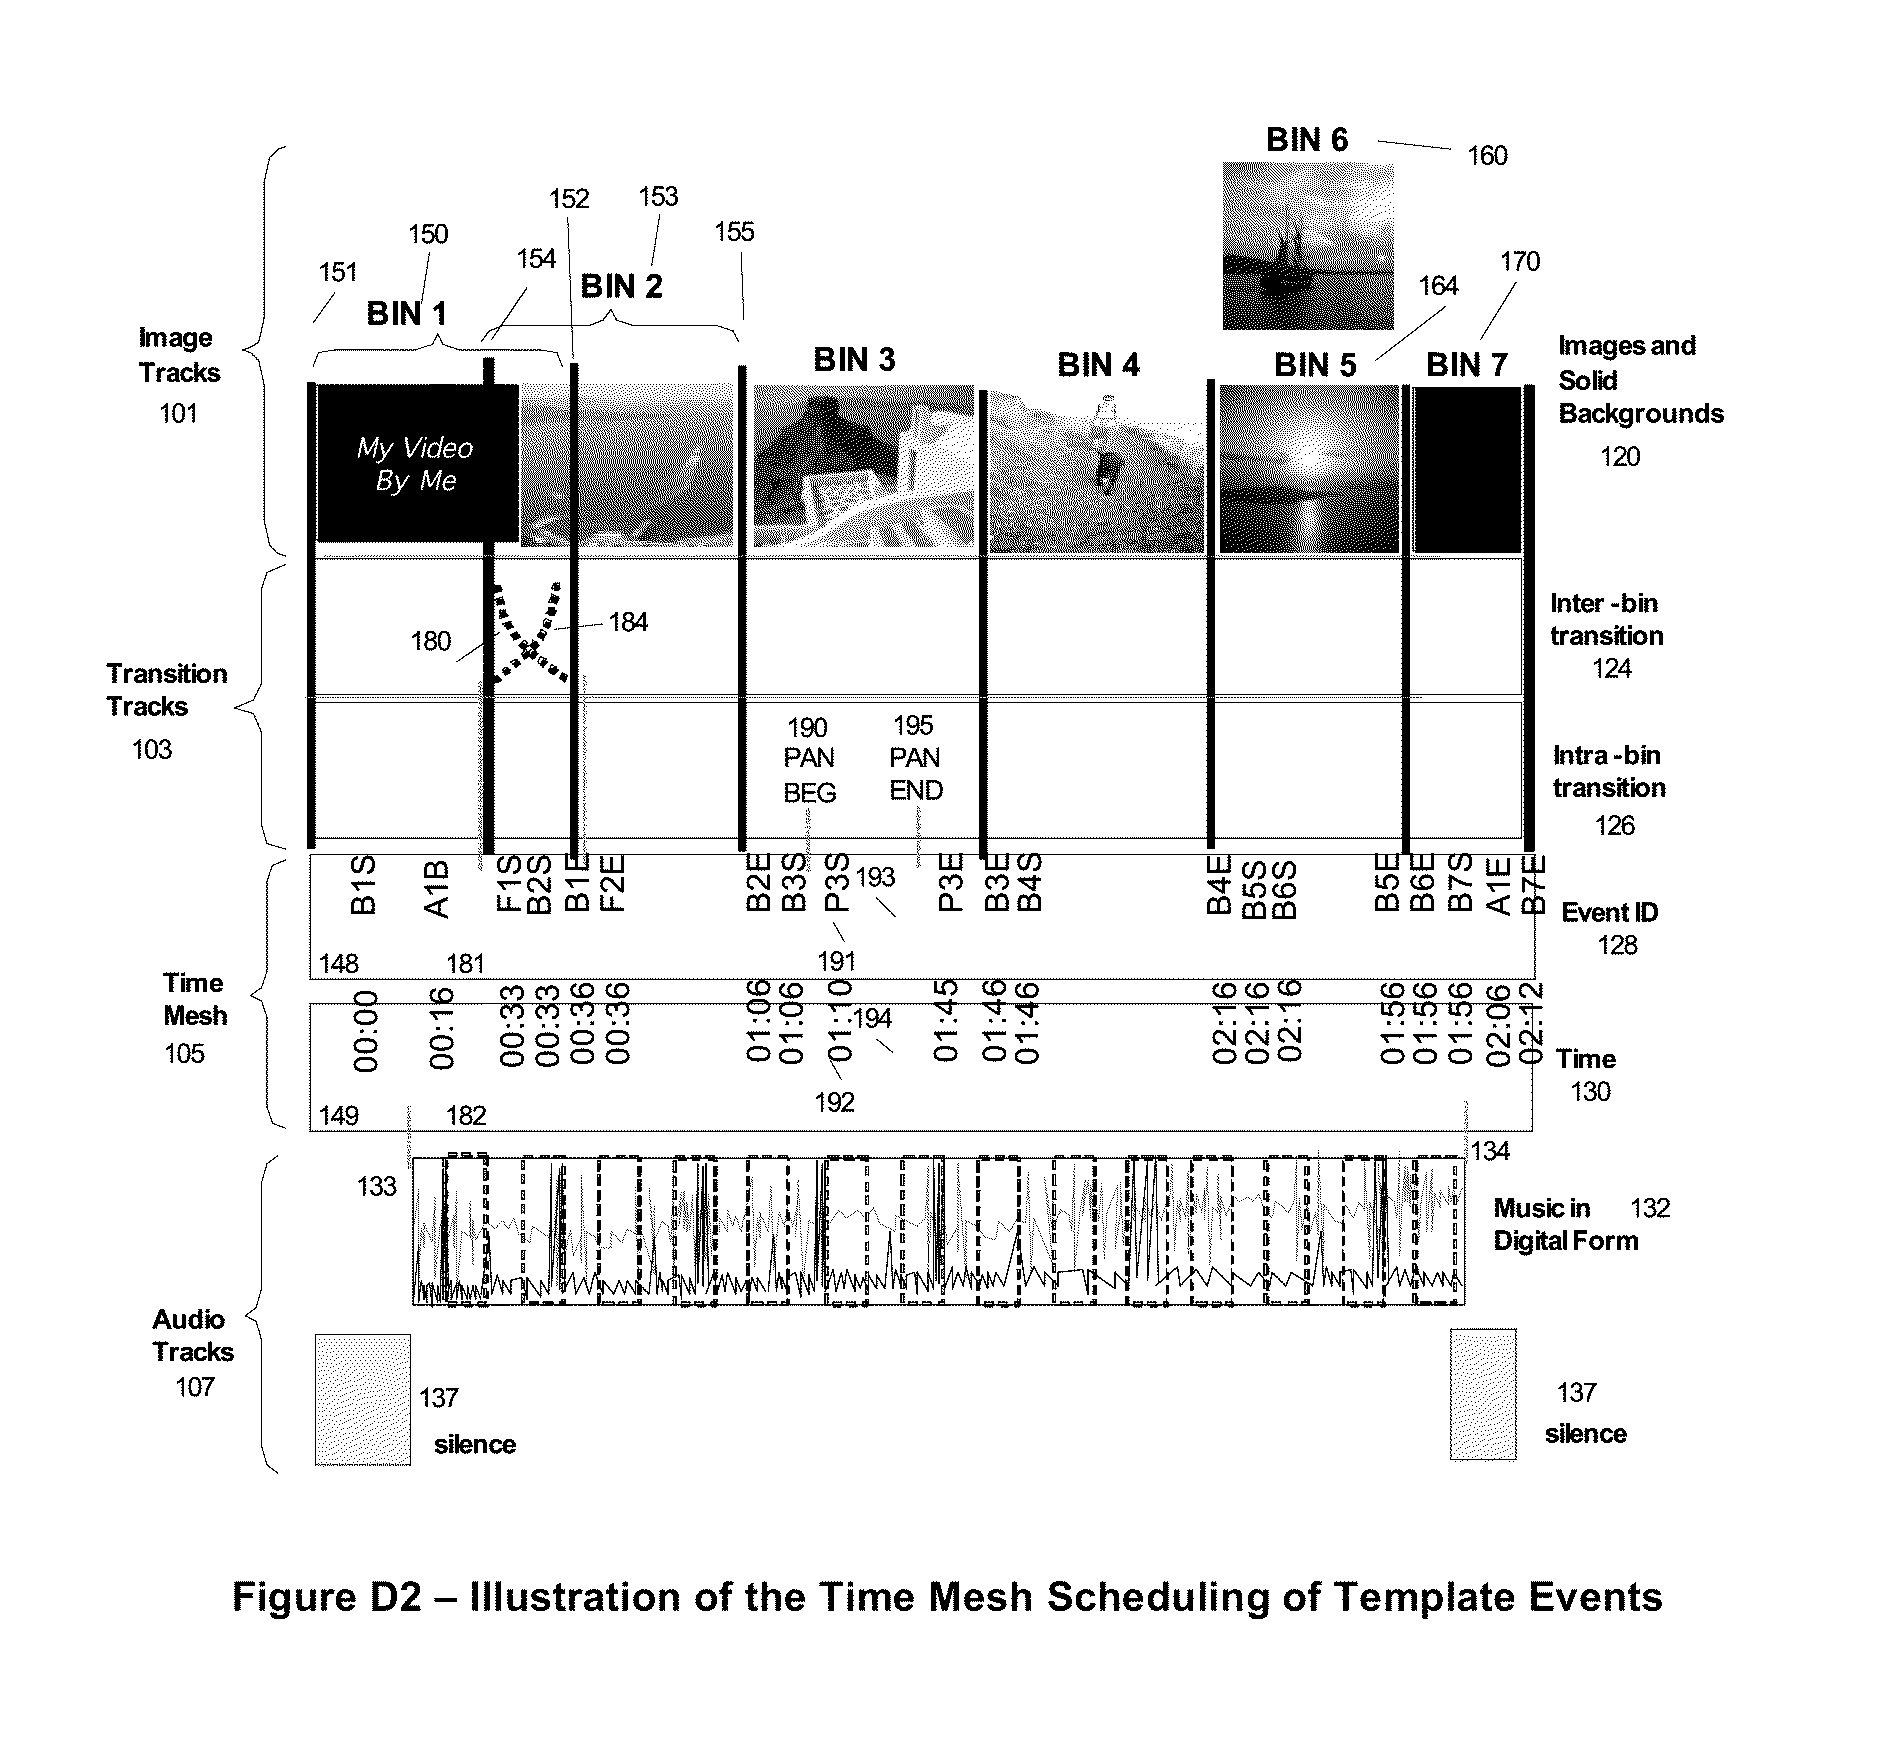 Software-based Method for Assisted Video Creation